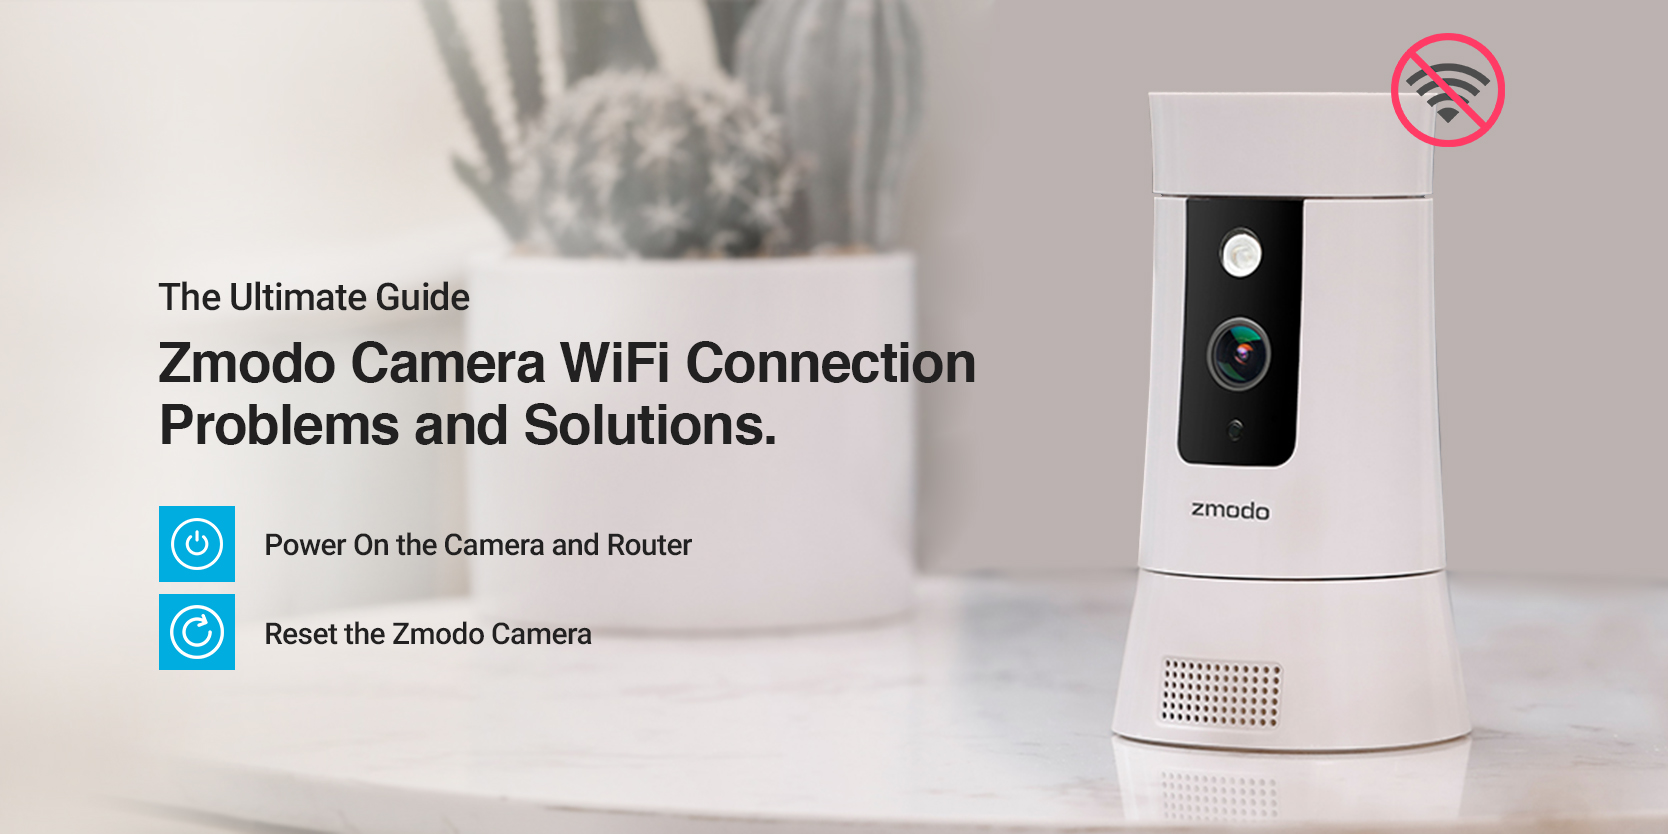 How to Fix Zmodo Camera Not Connecting to WiFi